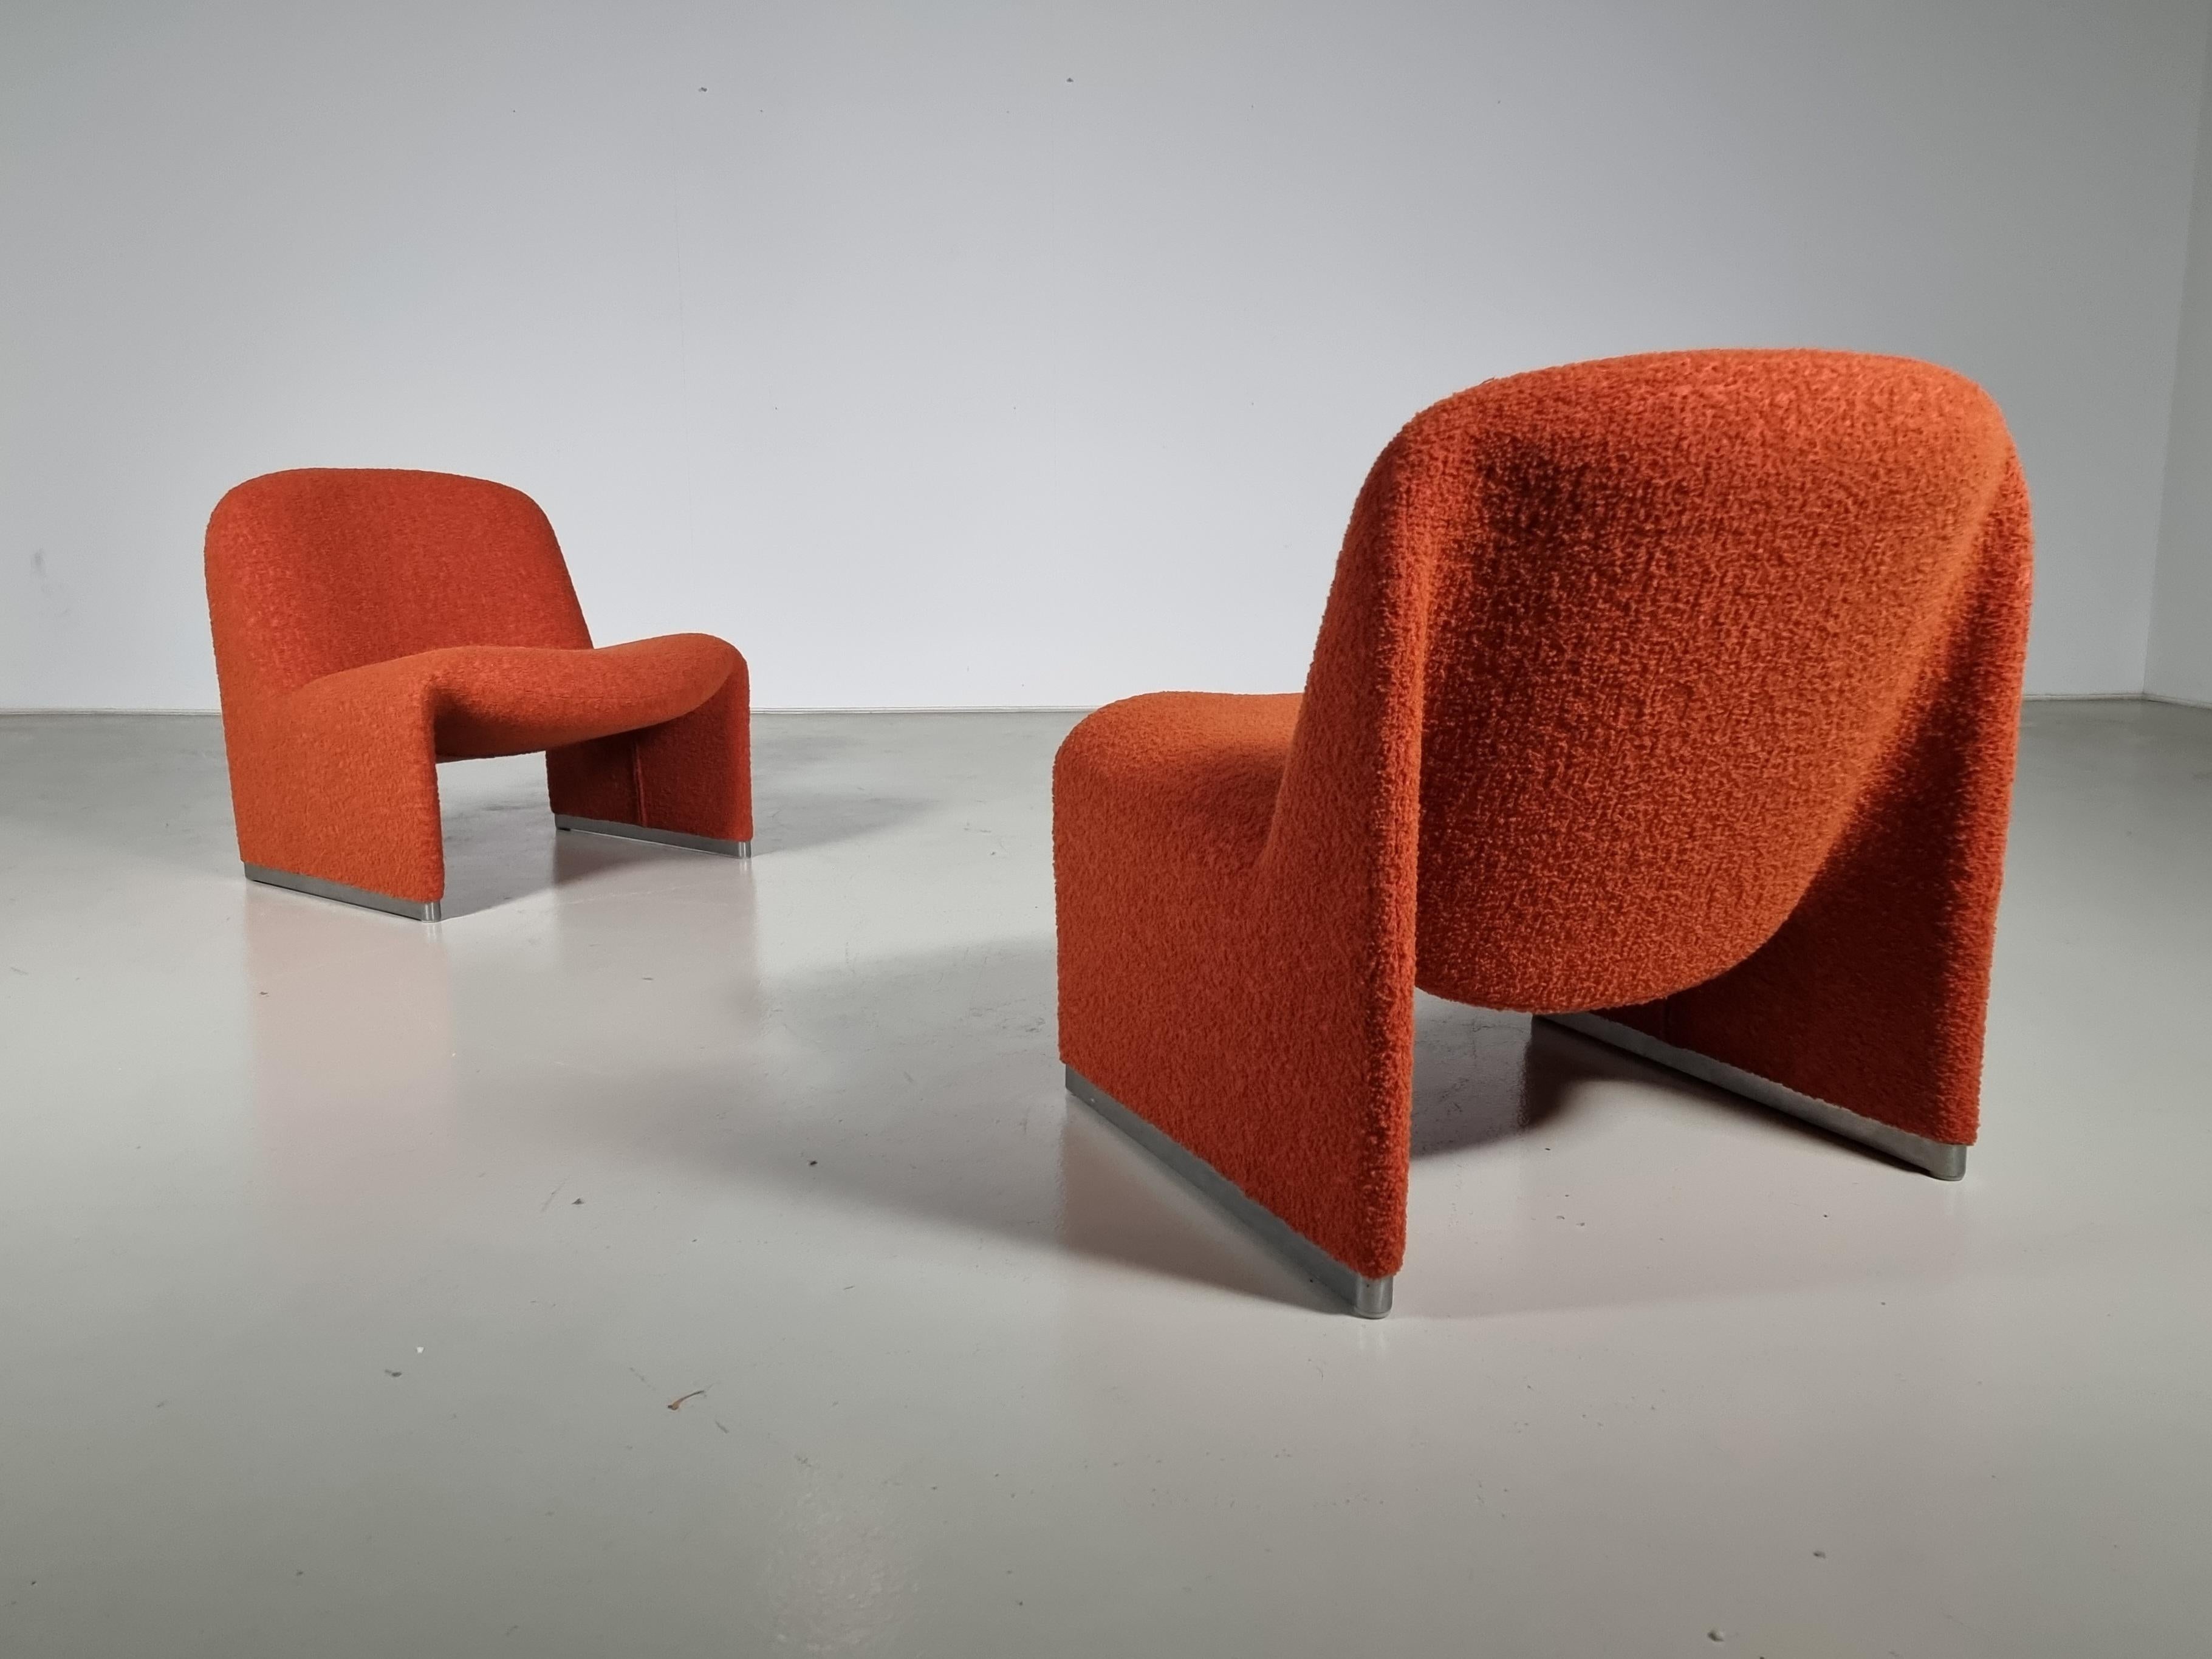 Set of 2 Alky Chairs in orange/red boucle, Giancarlo Piretti for Castelli, 1970 2